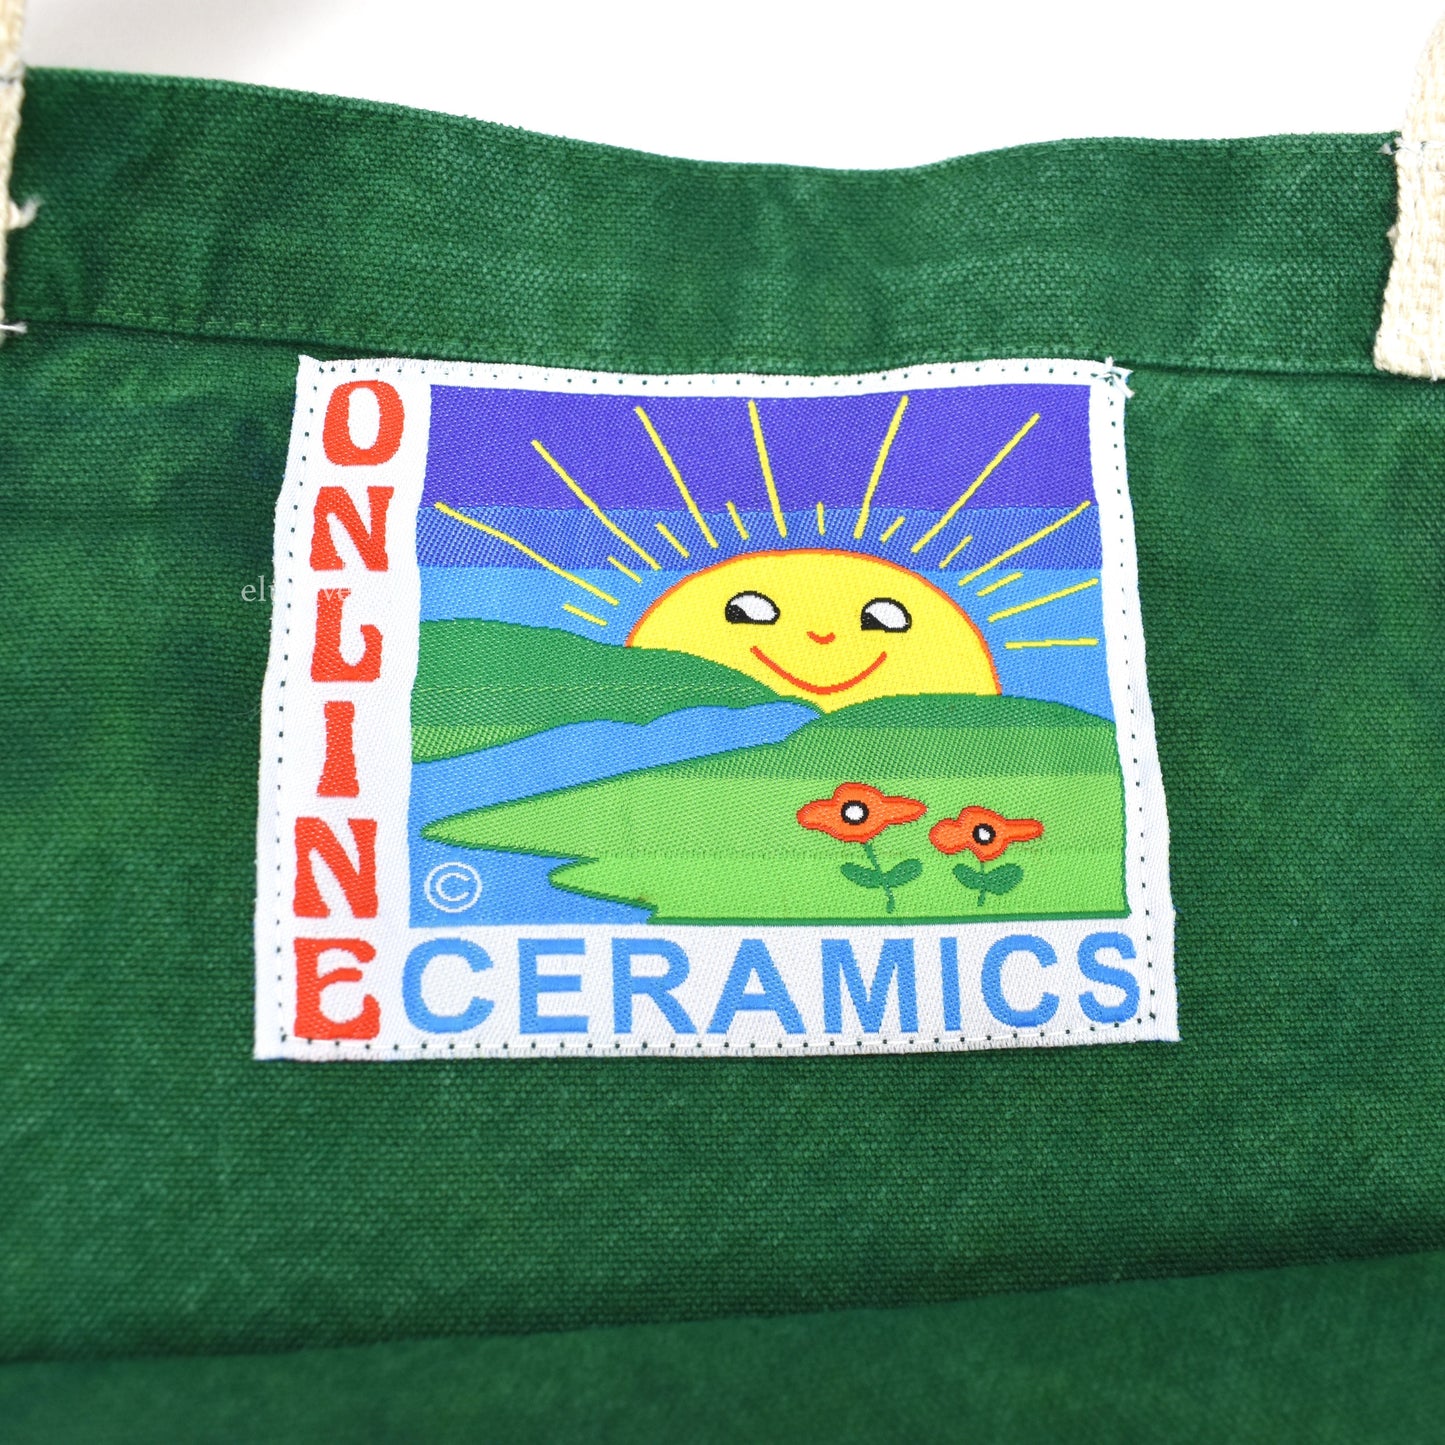 Online Ceramics - Turtle / Butterfly Logo Tote Bag